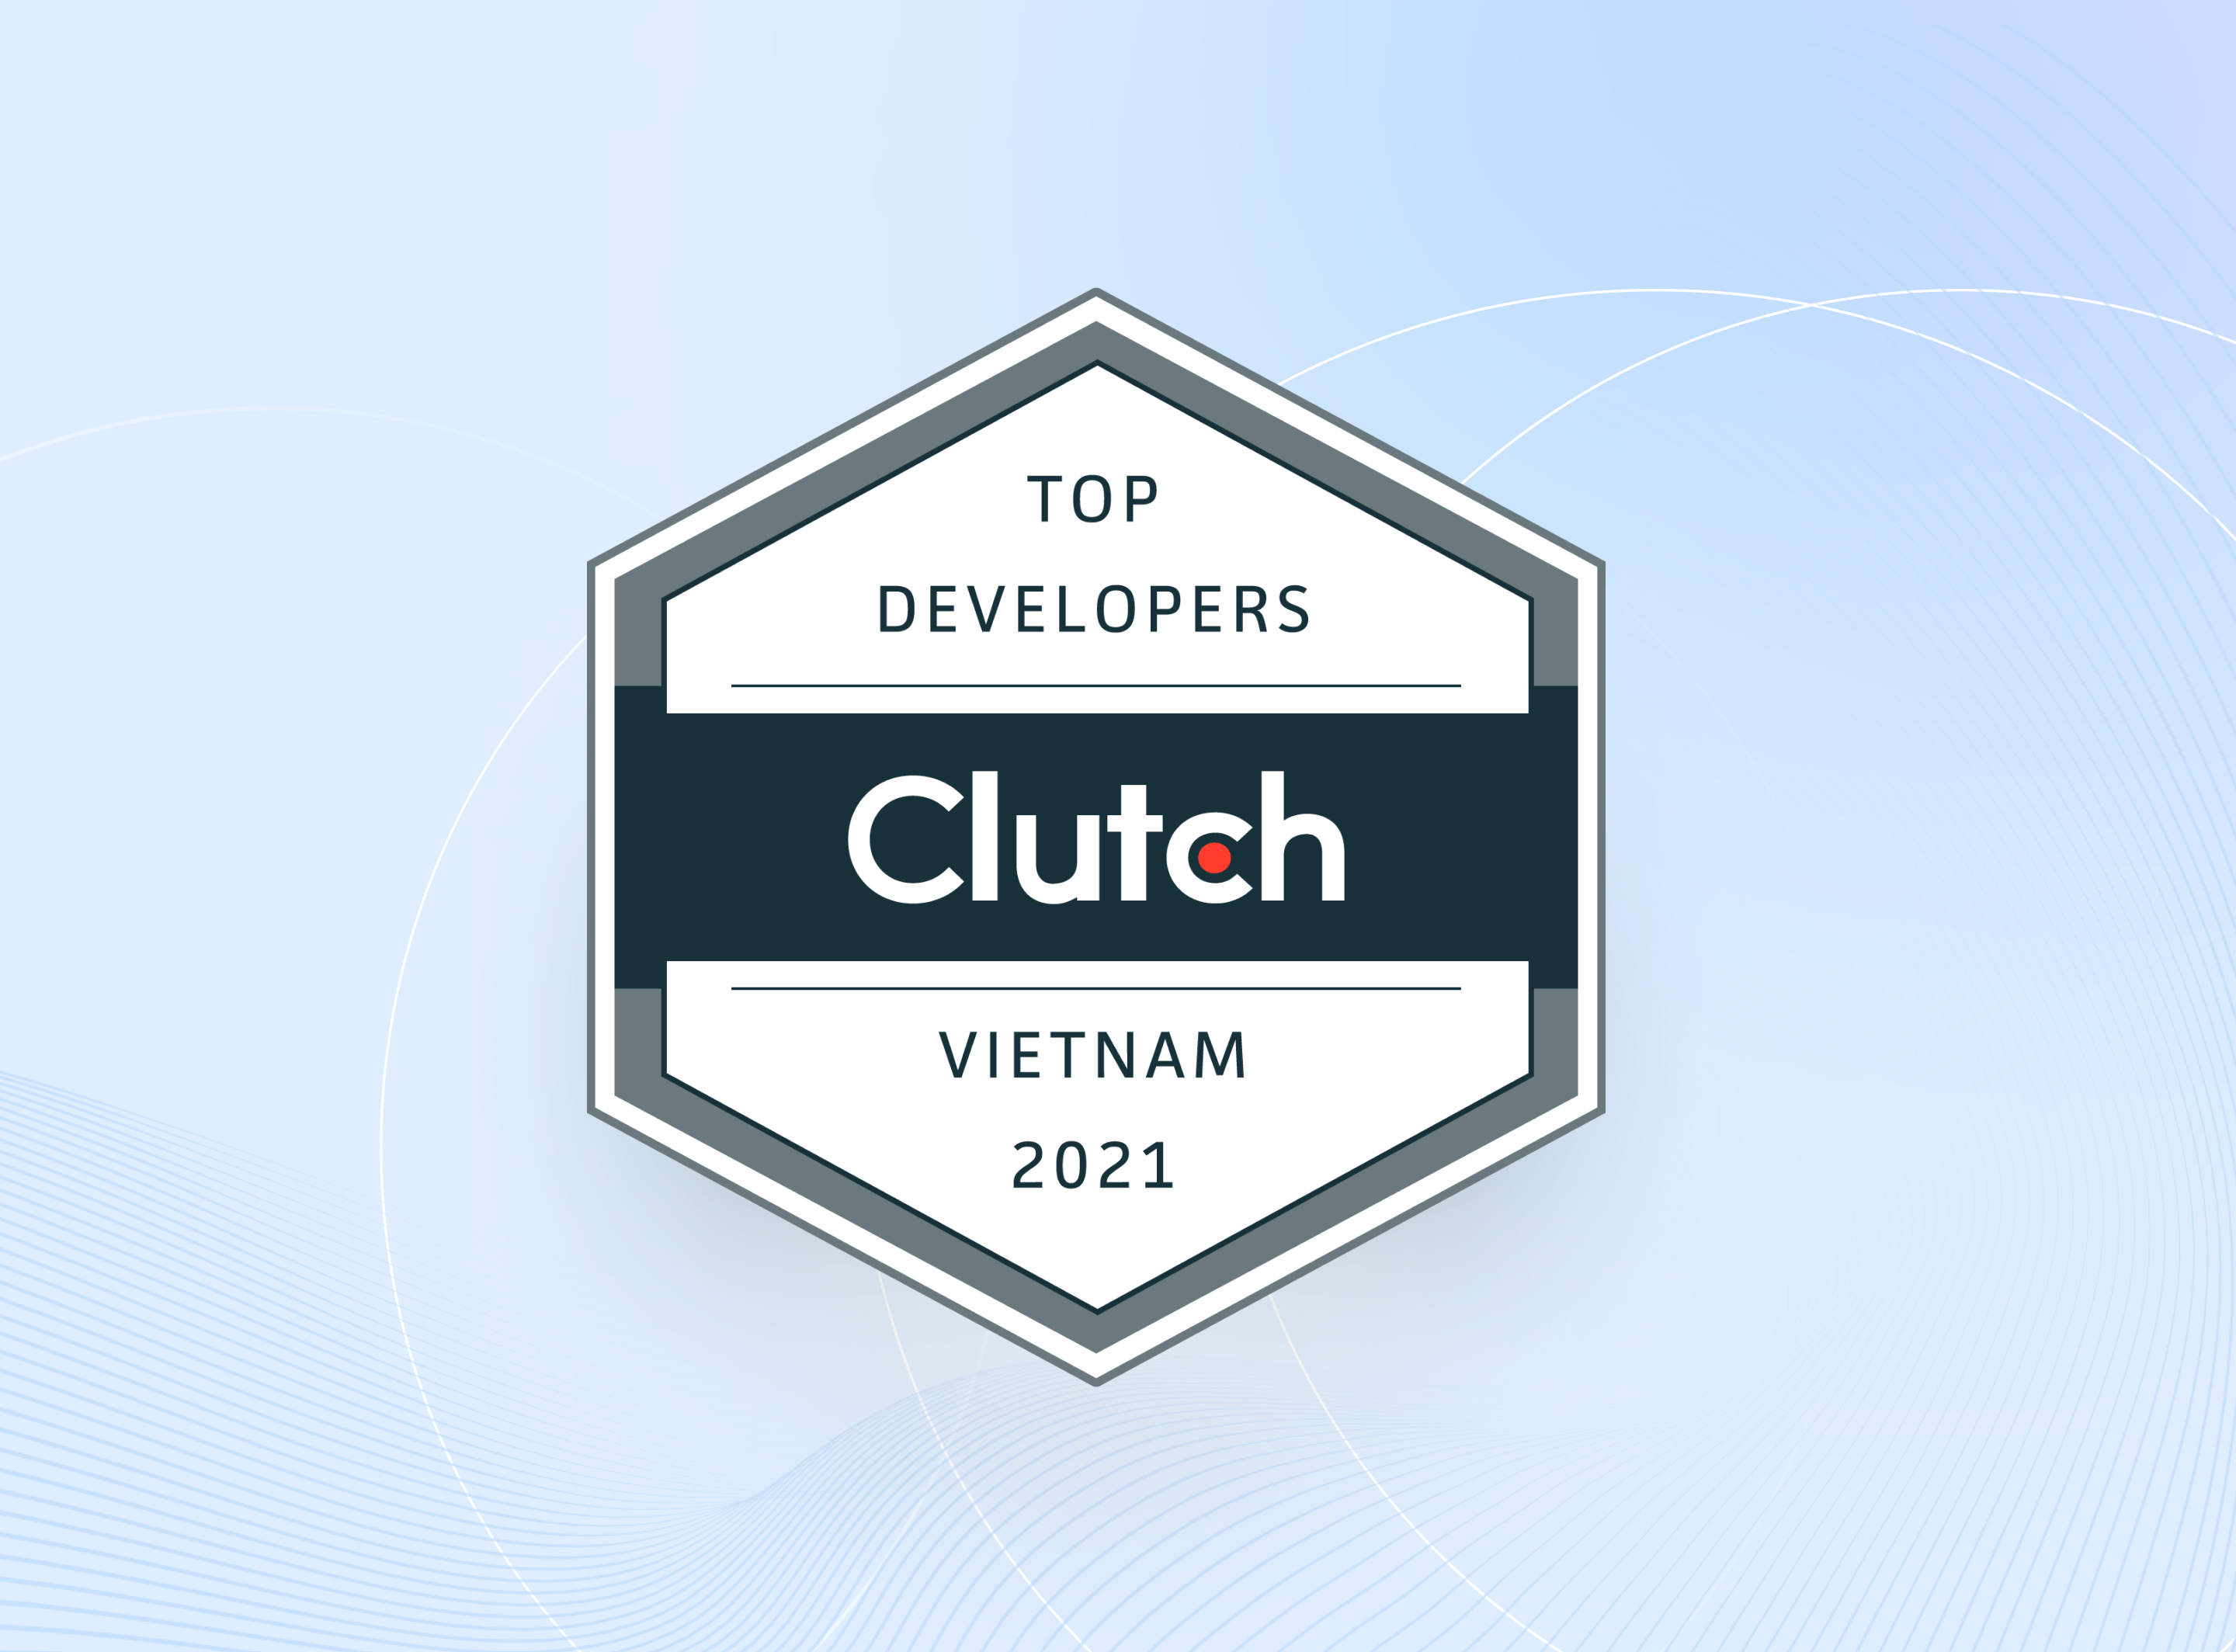 Clutch Lists Faba Technology as a Top App Development Company in Vietnam for 2021